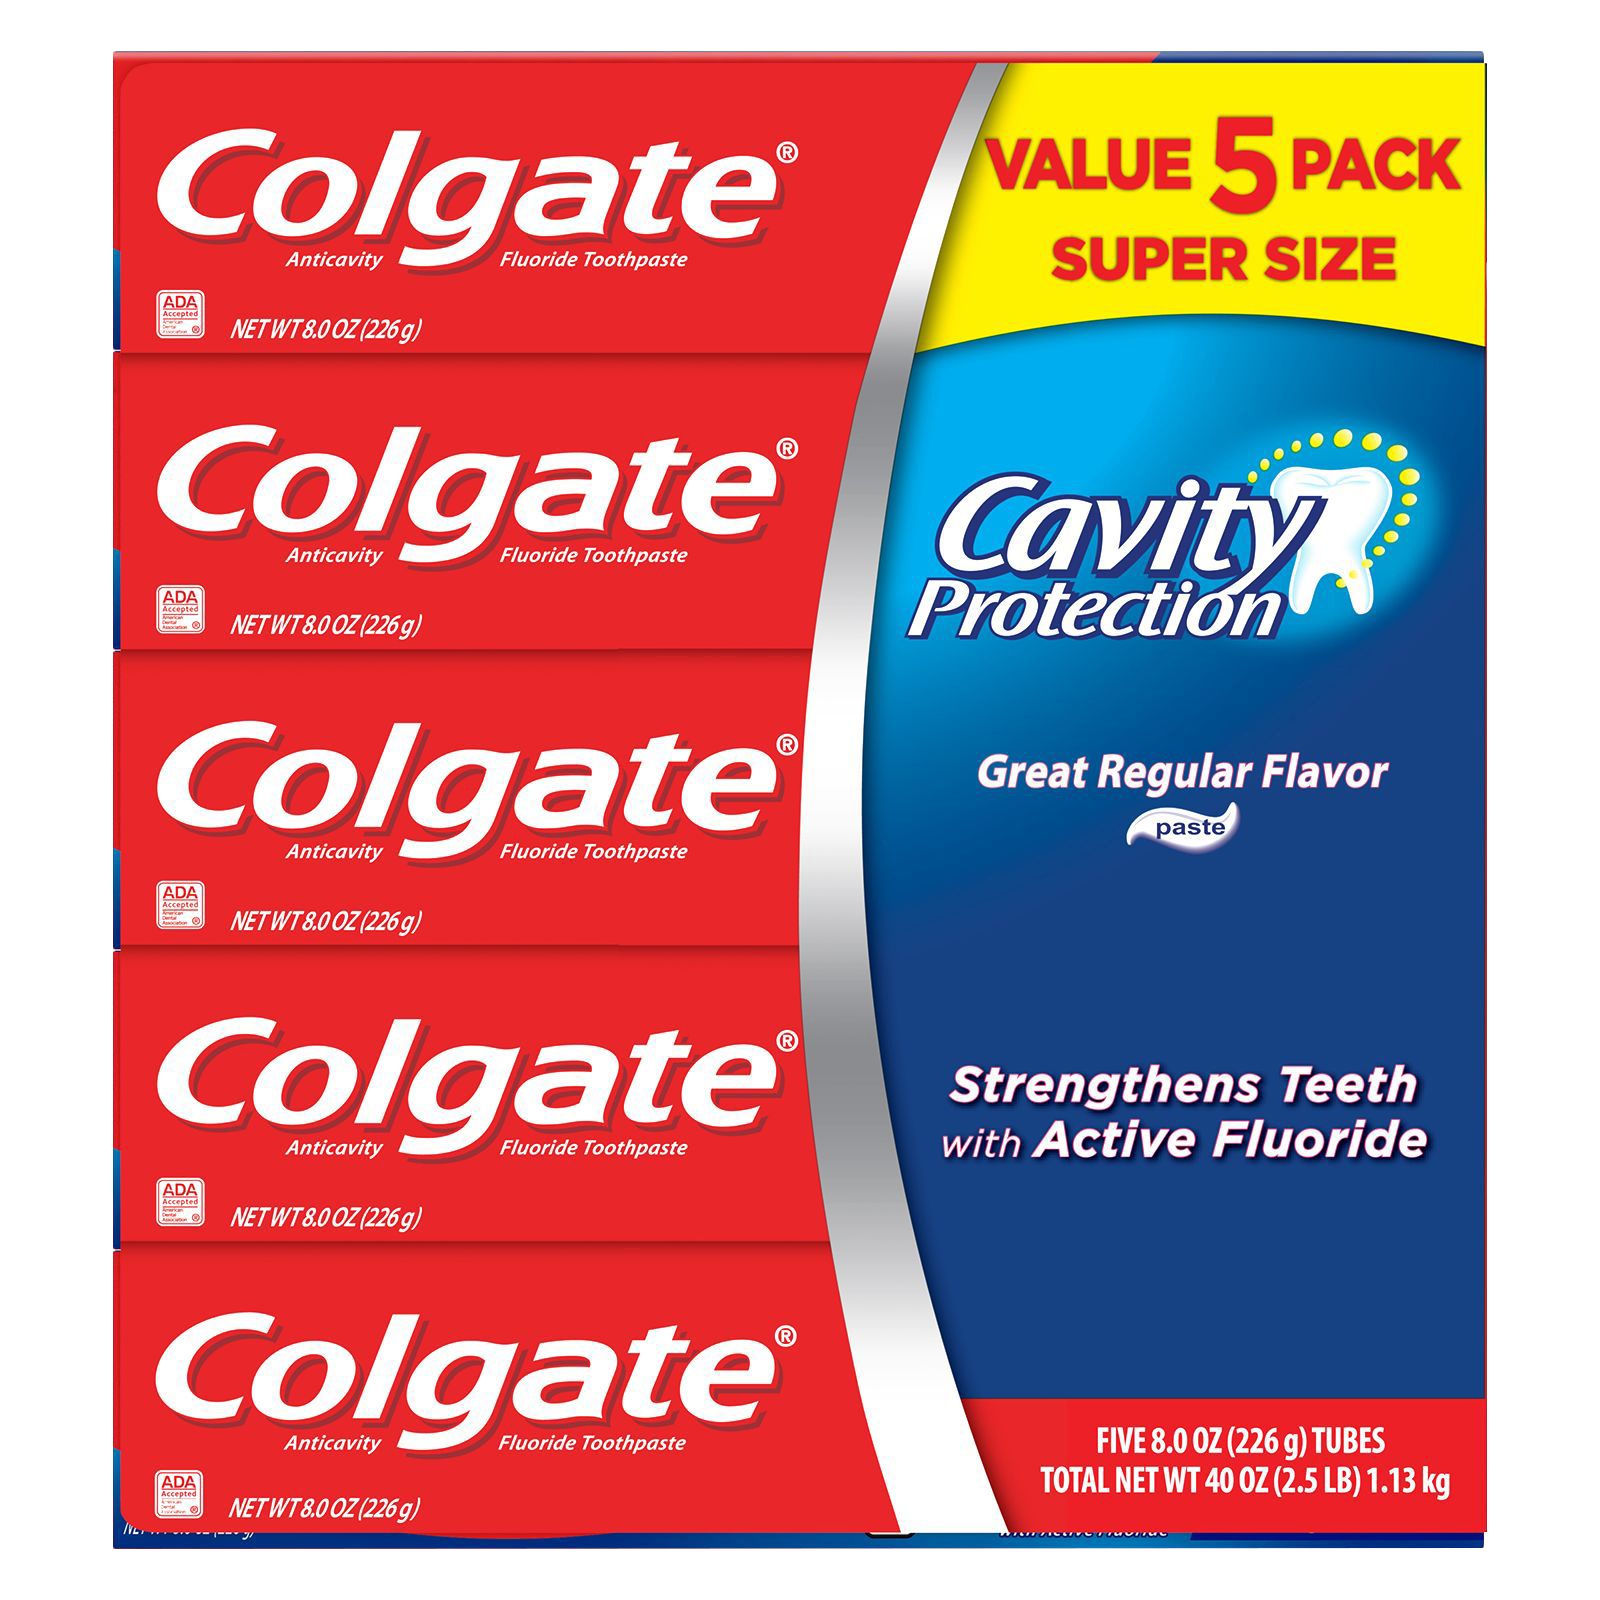 Colgate Cavity Protection Toothpaste with Fluoride, 5 pk./8 oz. - Regular Flavor